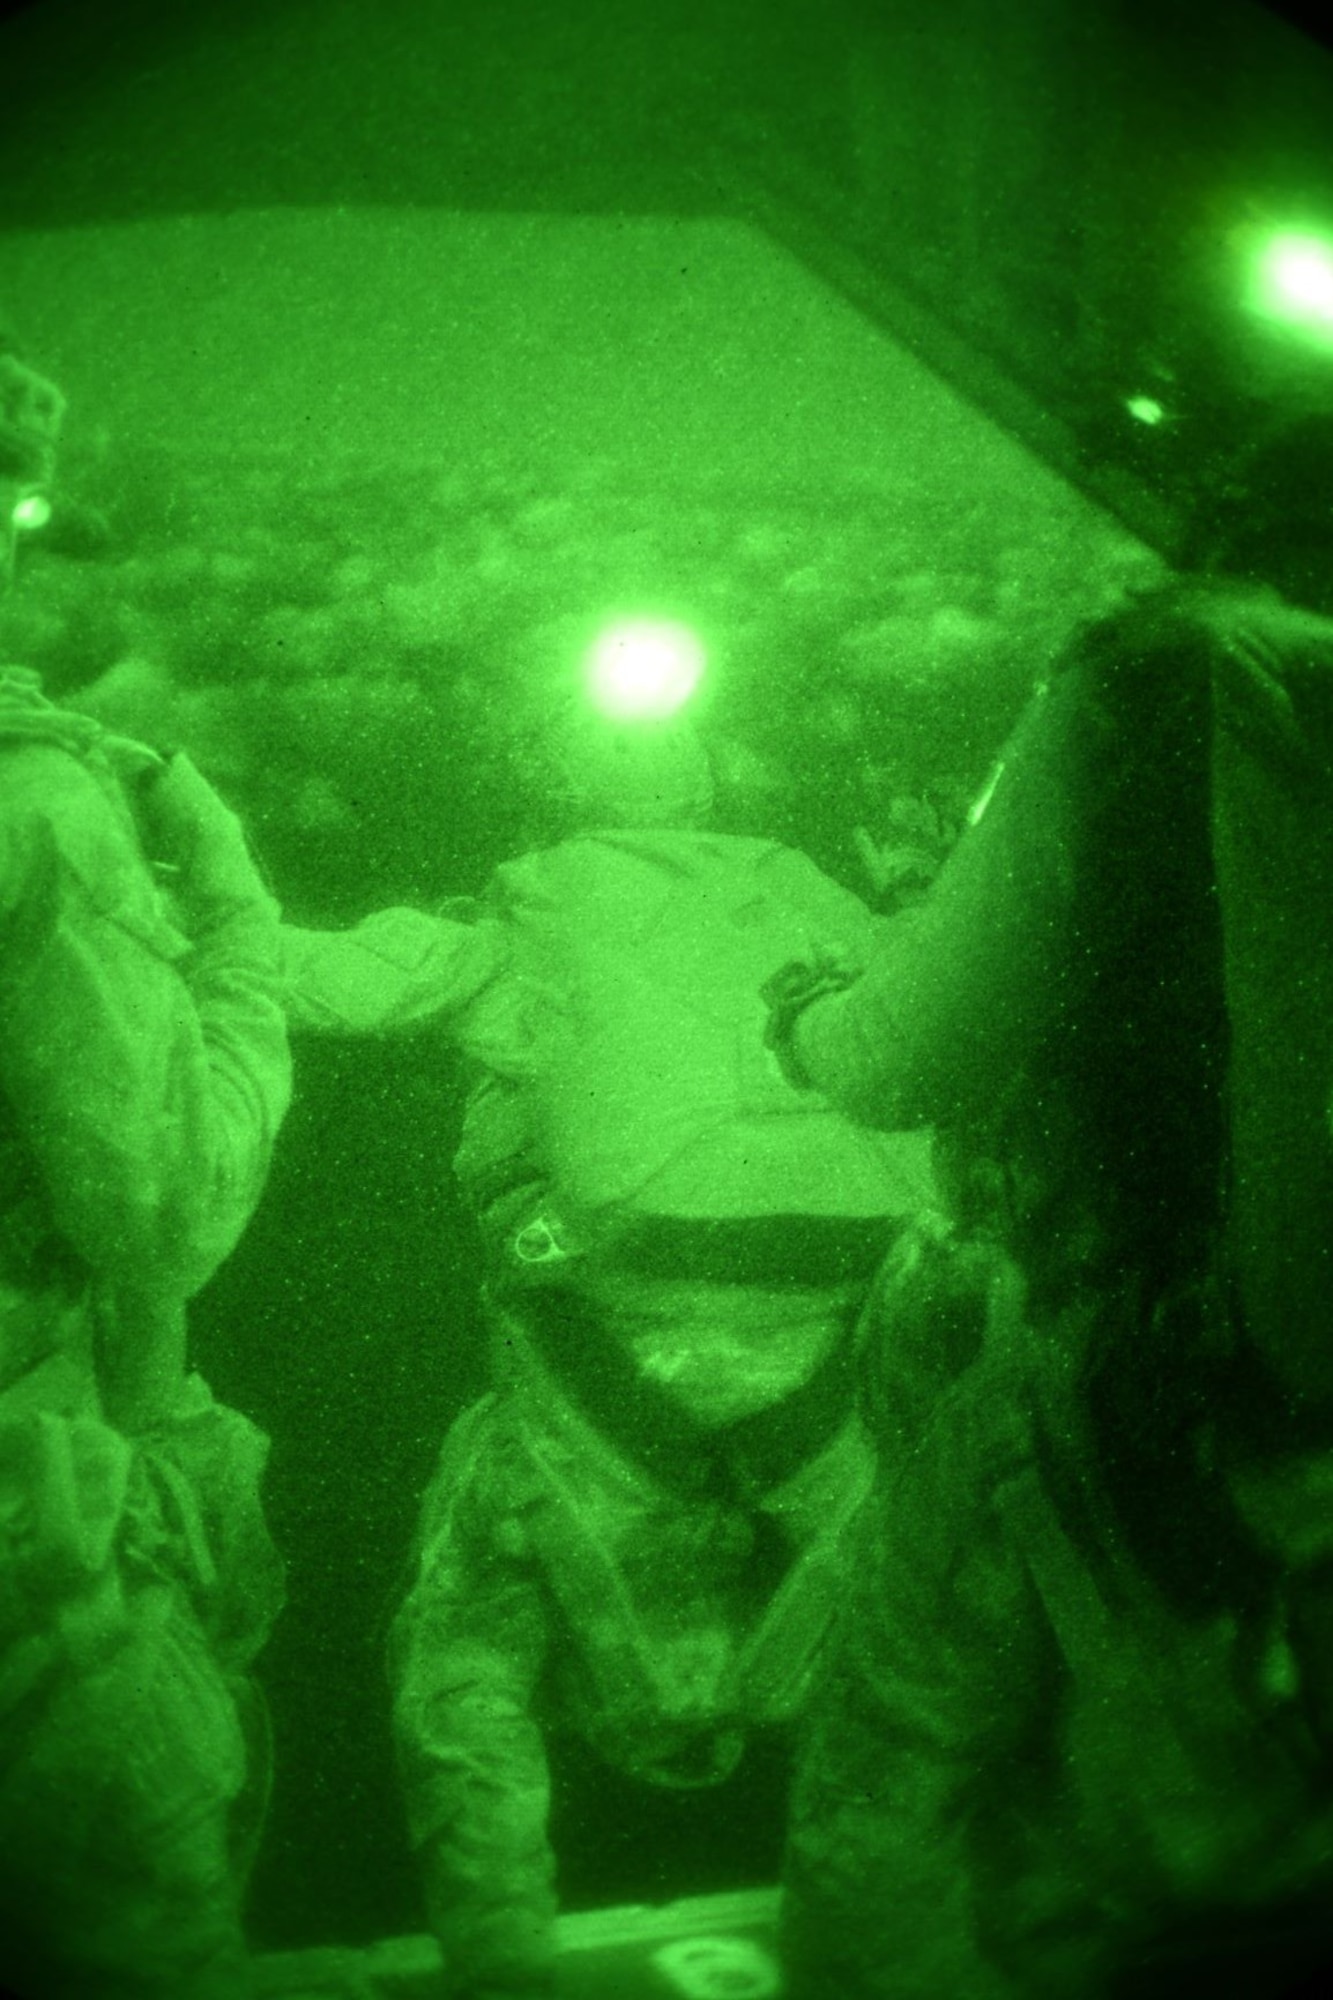 Airmen from the 320th Special Tactics Squadron perform a night jump above Wake Island, Wake Atoll, during Exercise Gryphon Pacific 20-1, Nov. 15, 2019, over the Pacific Ocean.